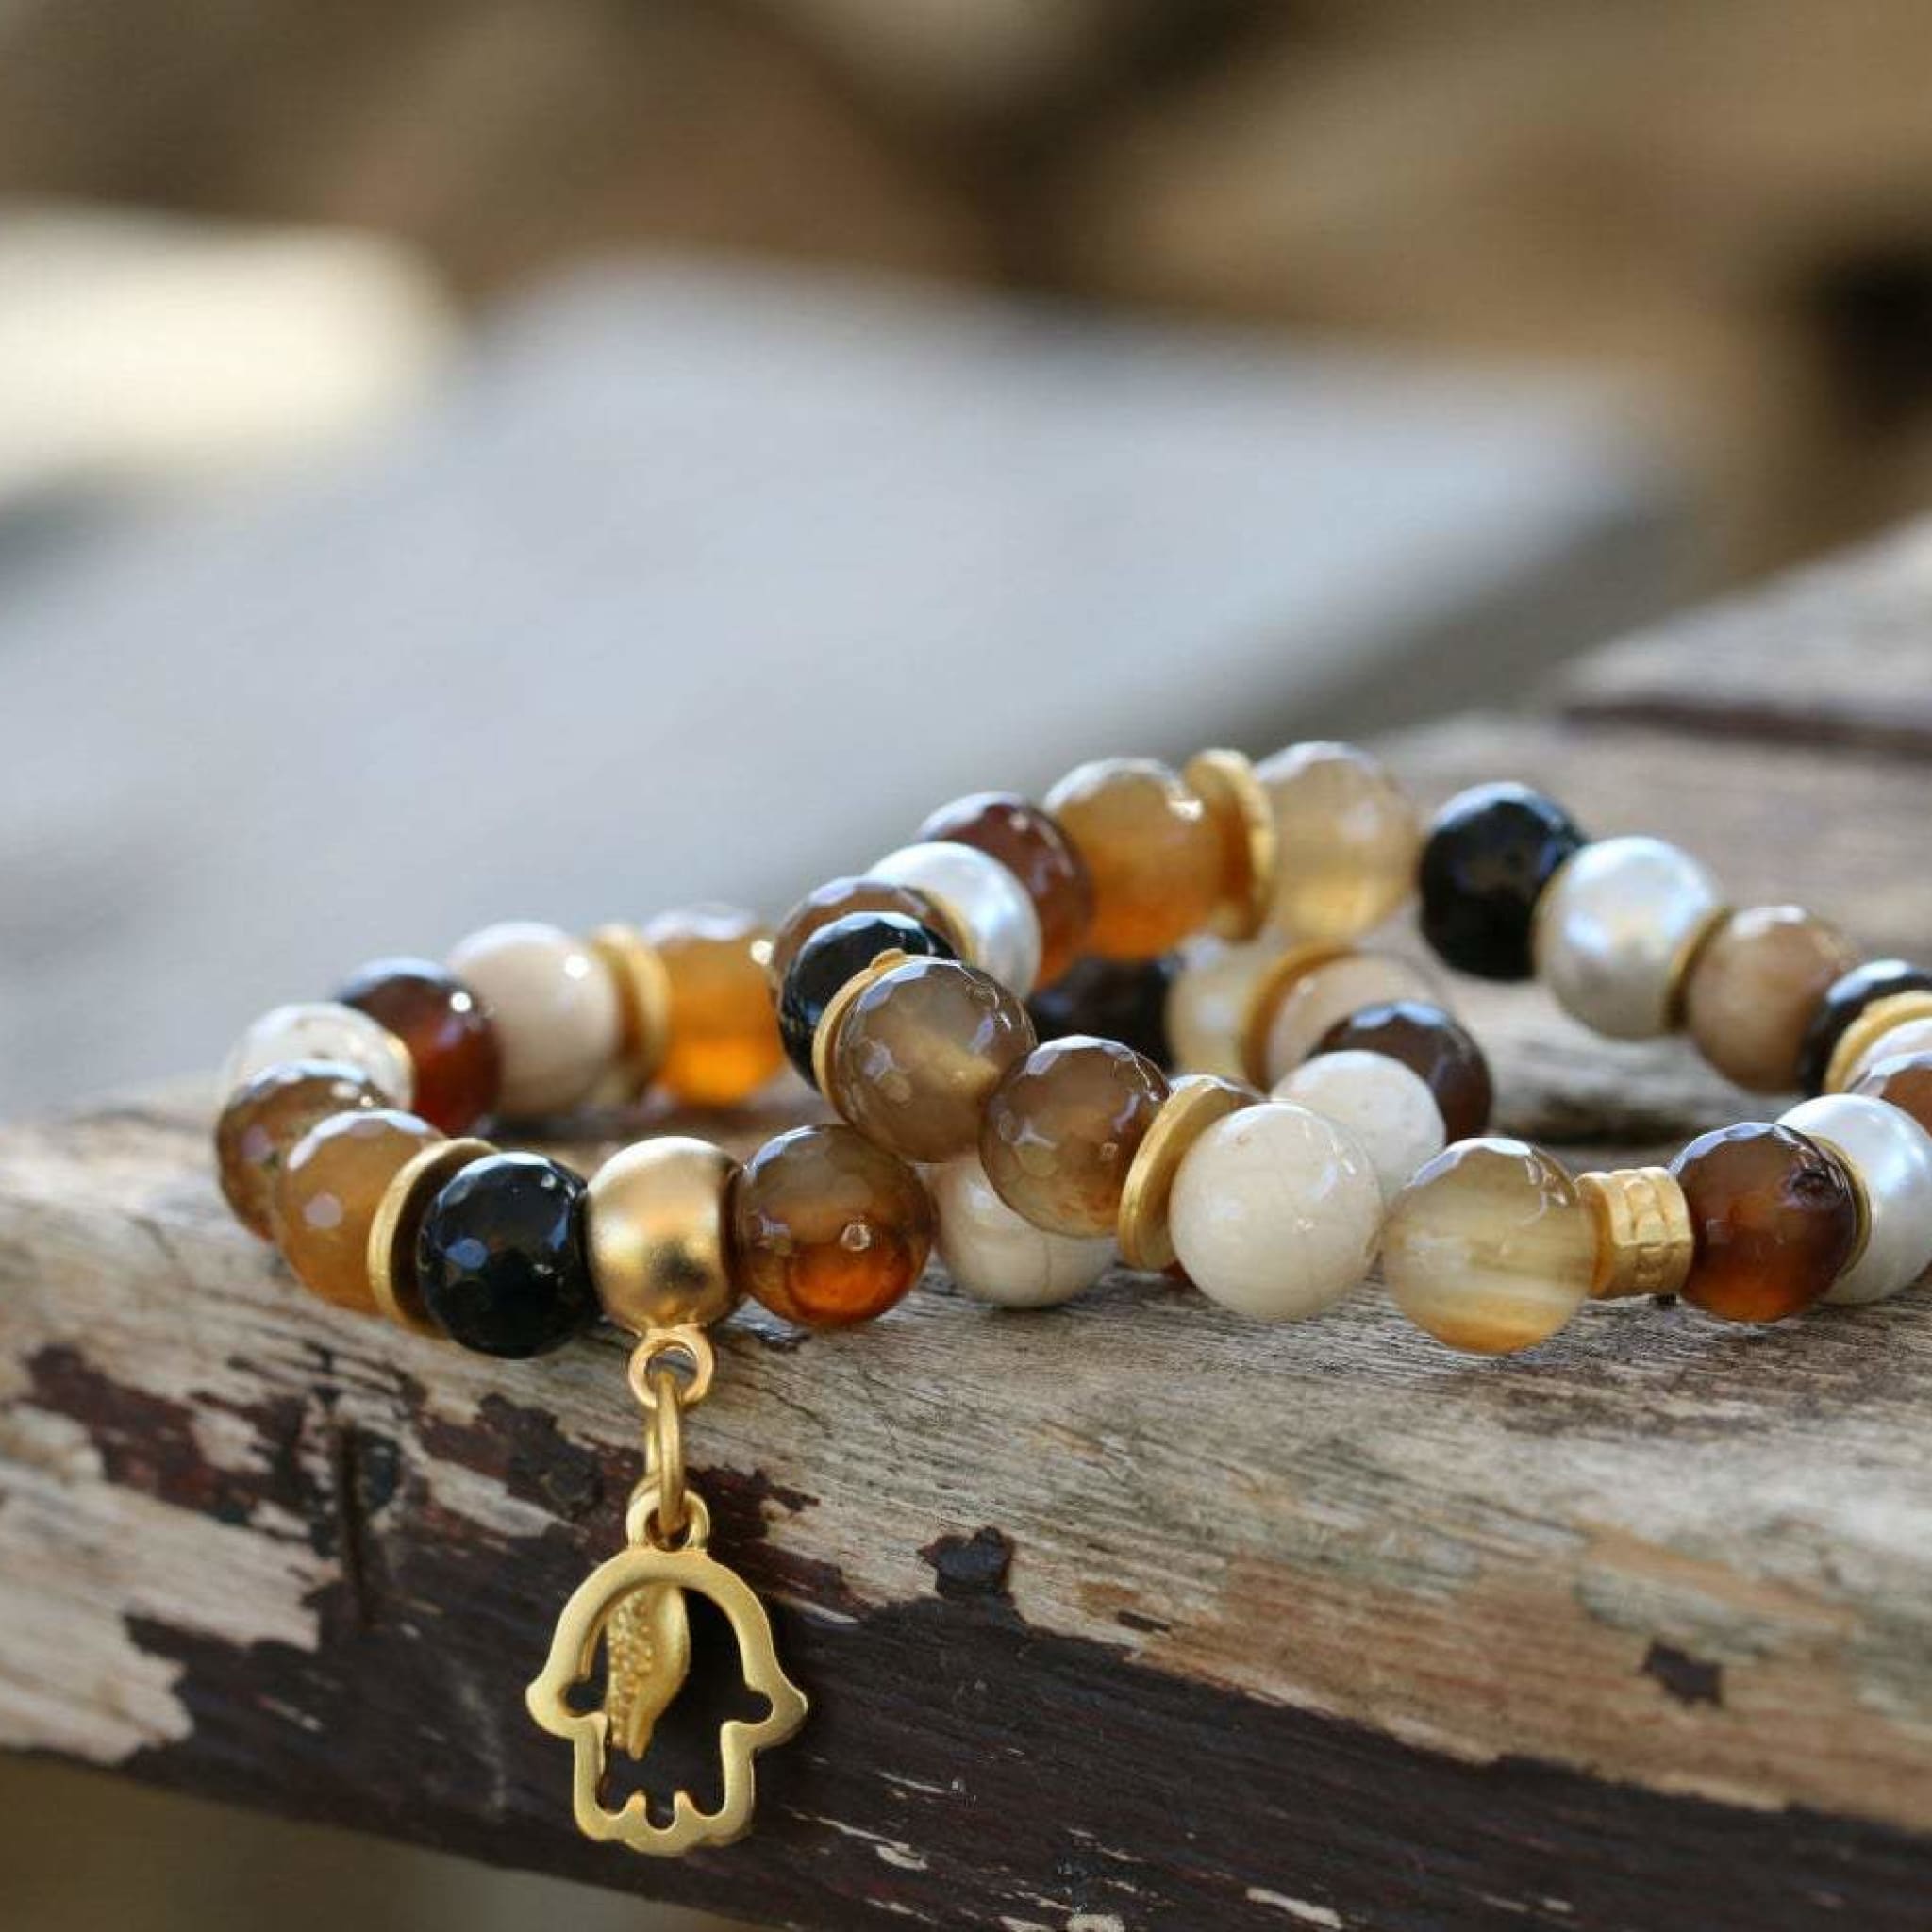 Banded/Lace Agate Natural Stone Bracelet With Earrings, Brown Double Shade